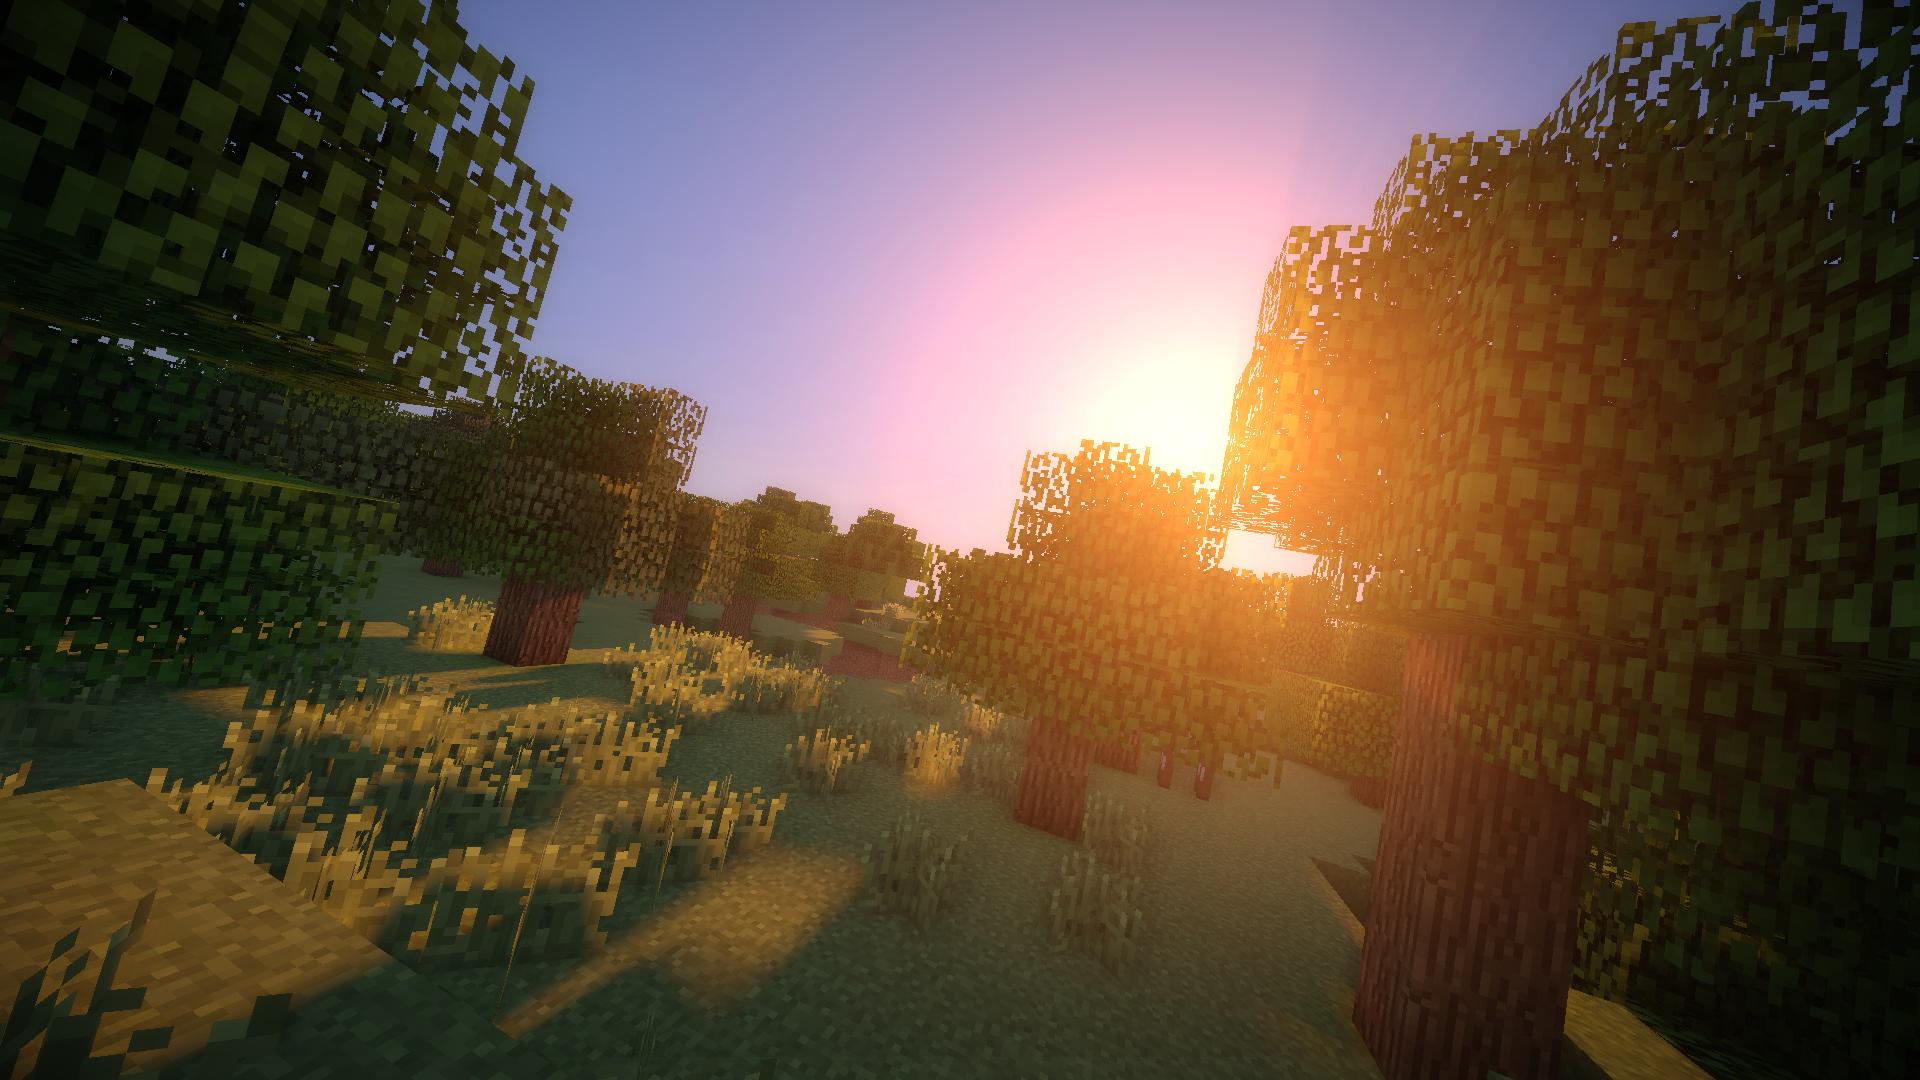 minecraft backgrounds shaders